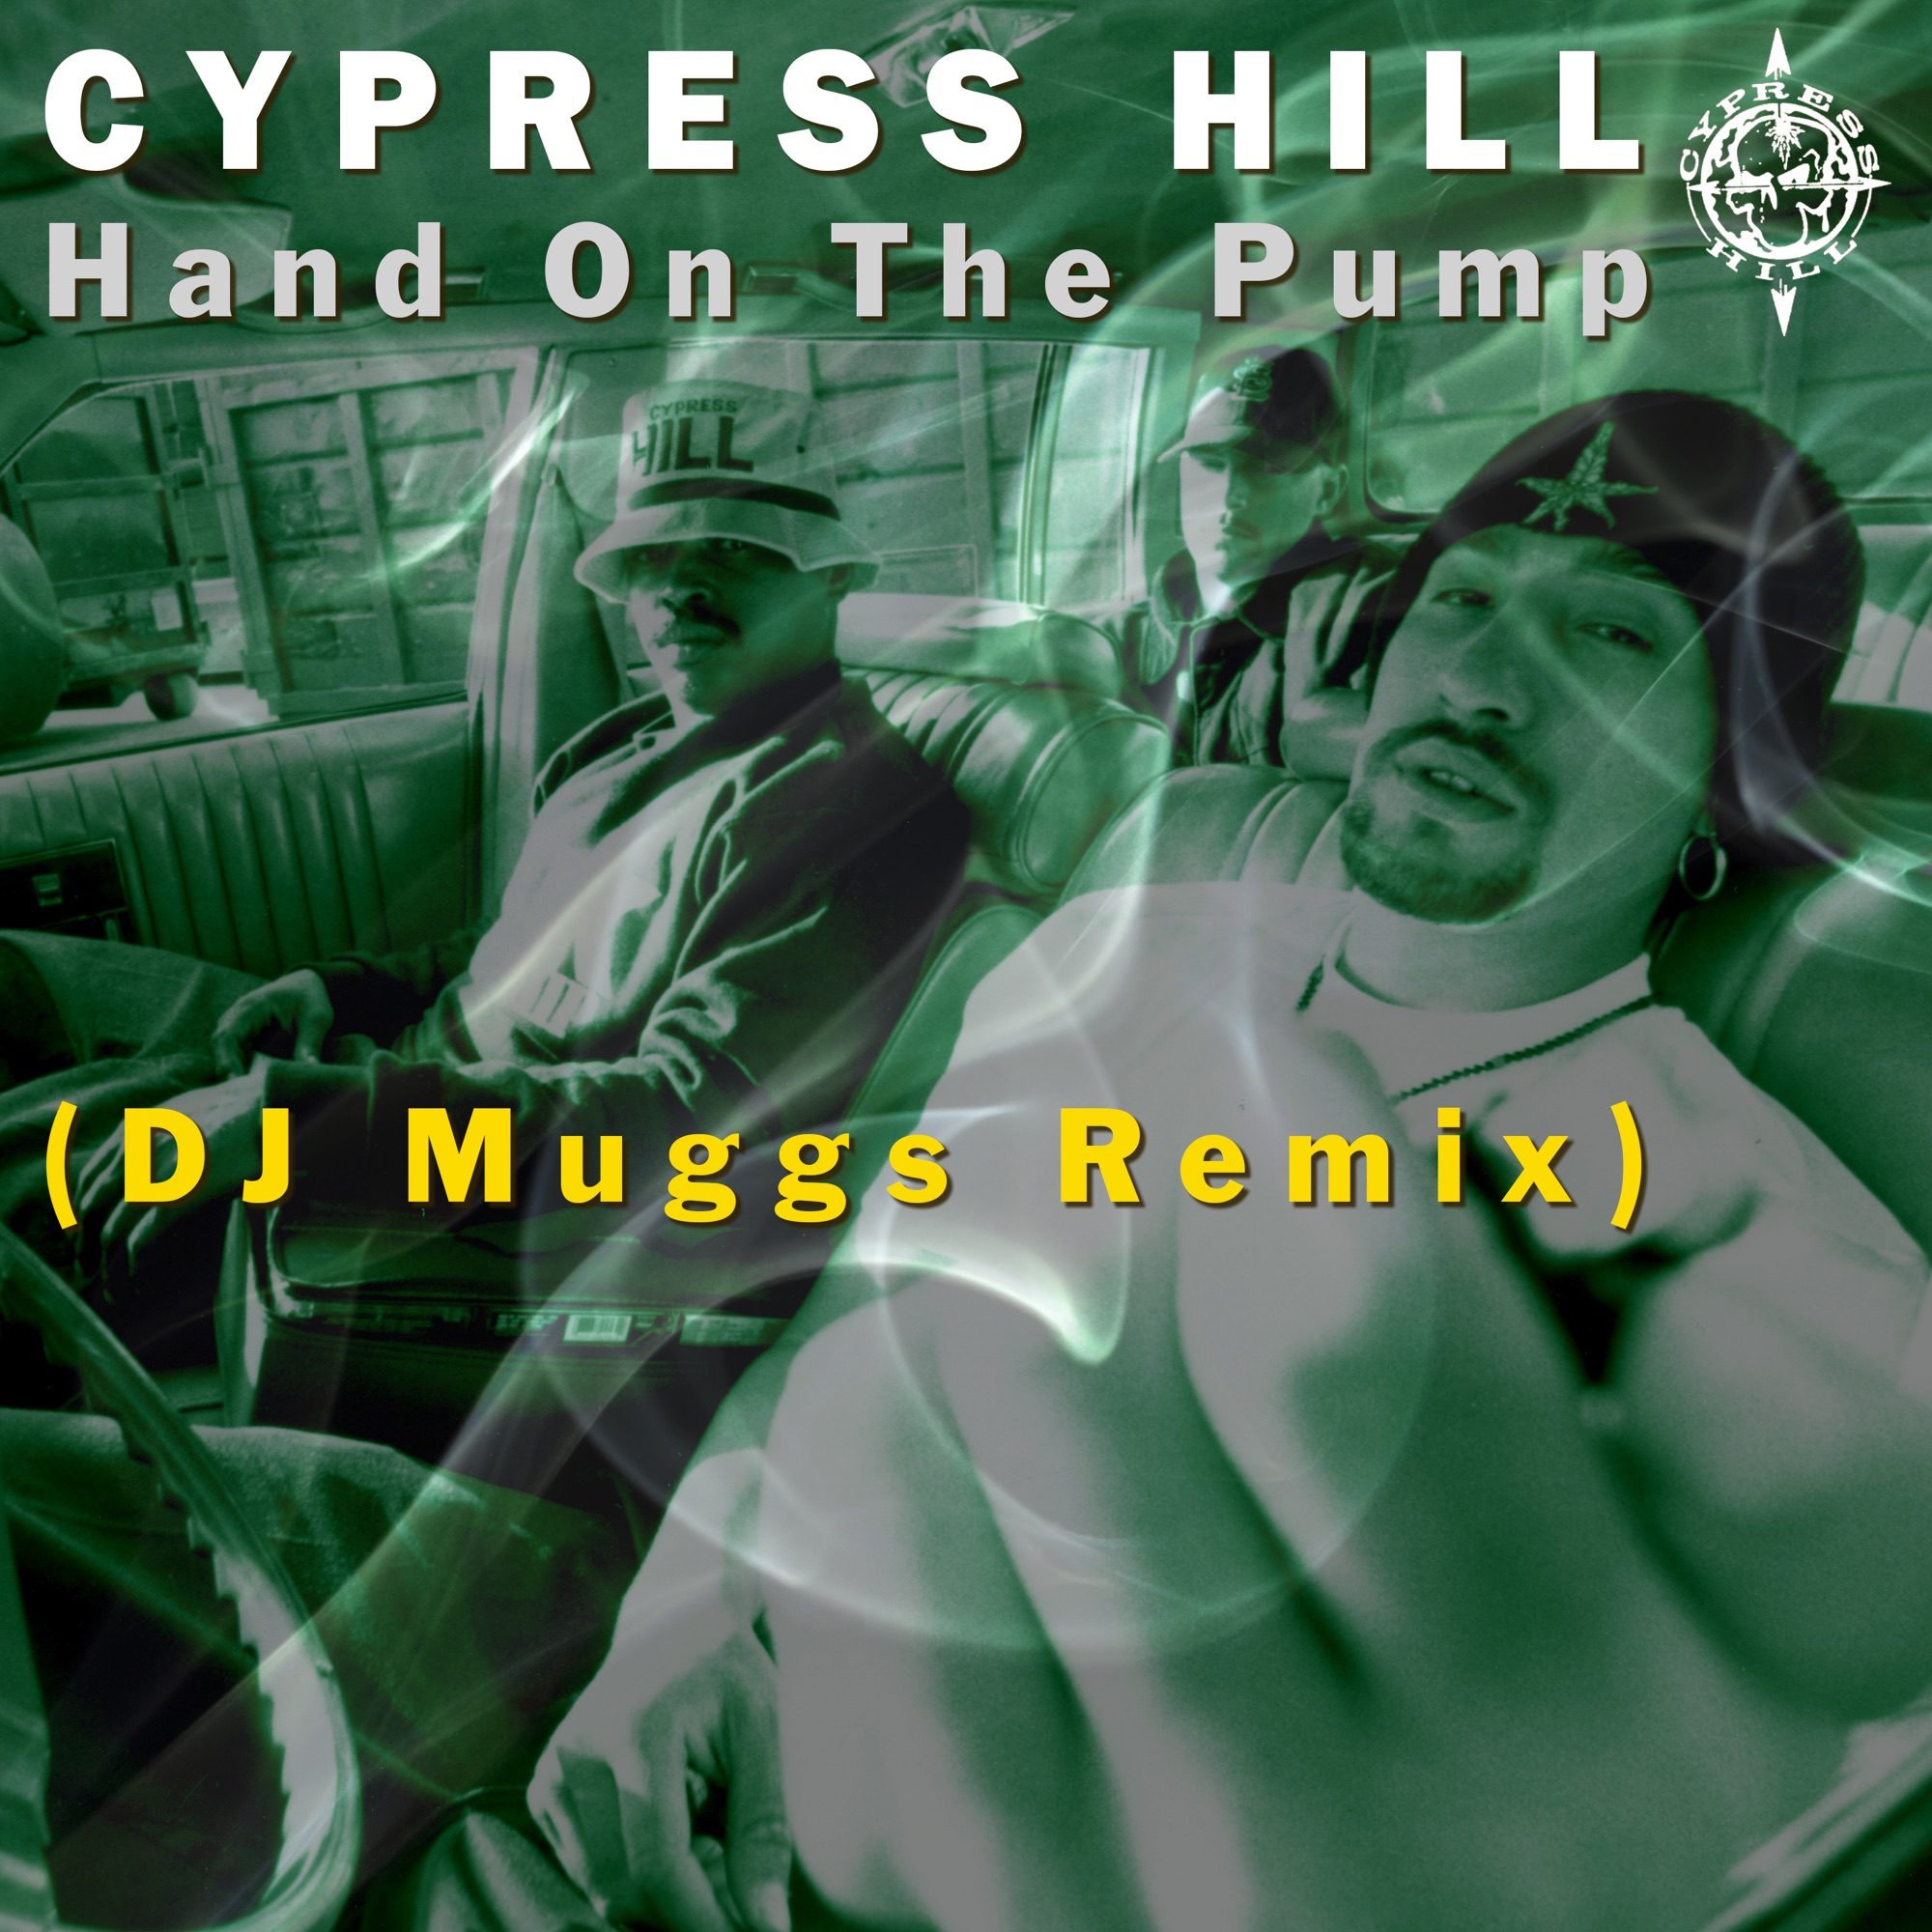 Art for Hand On the Pump (DJ MUGGS 2021 Remix) by Cypress Hill